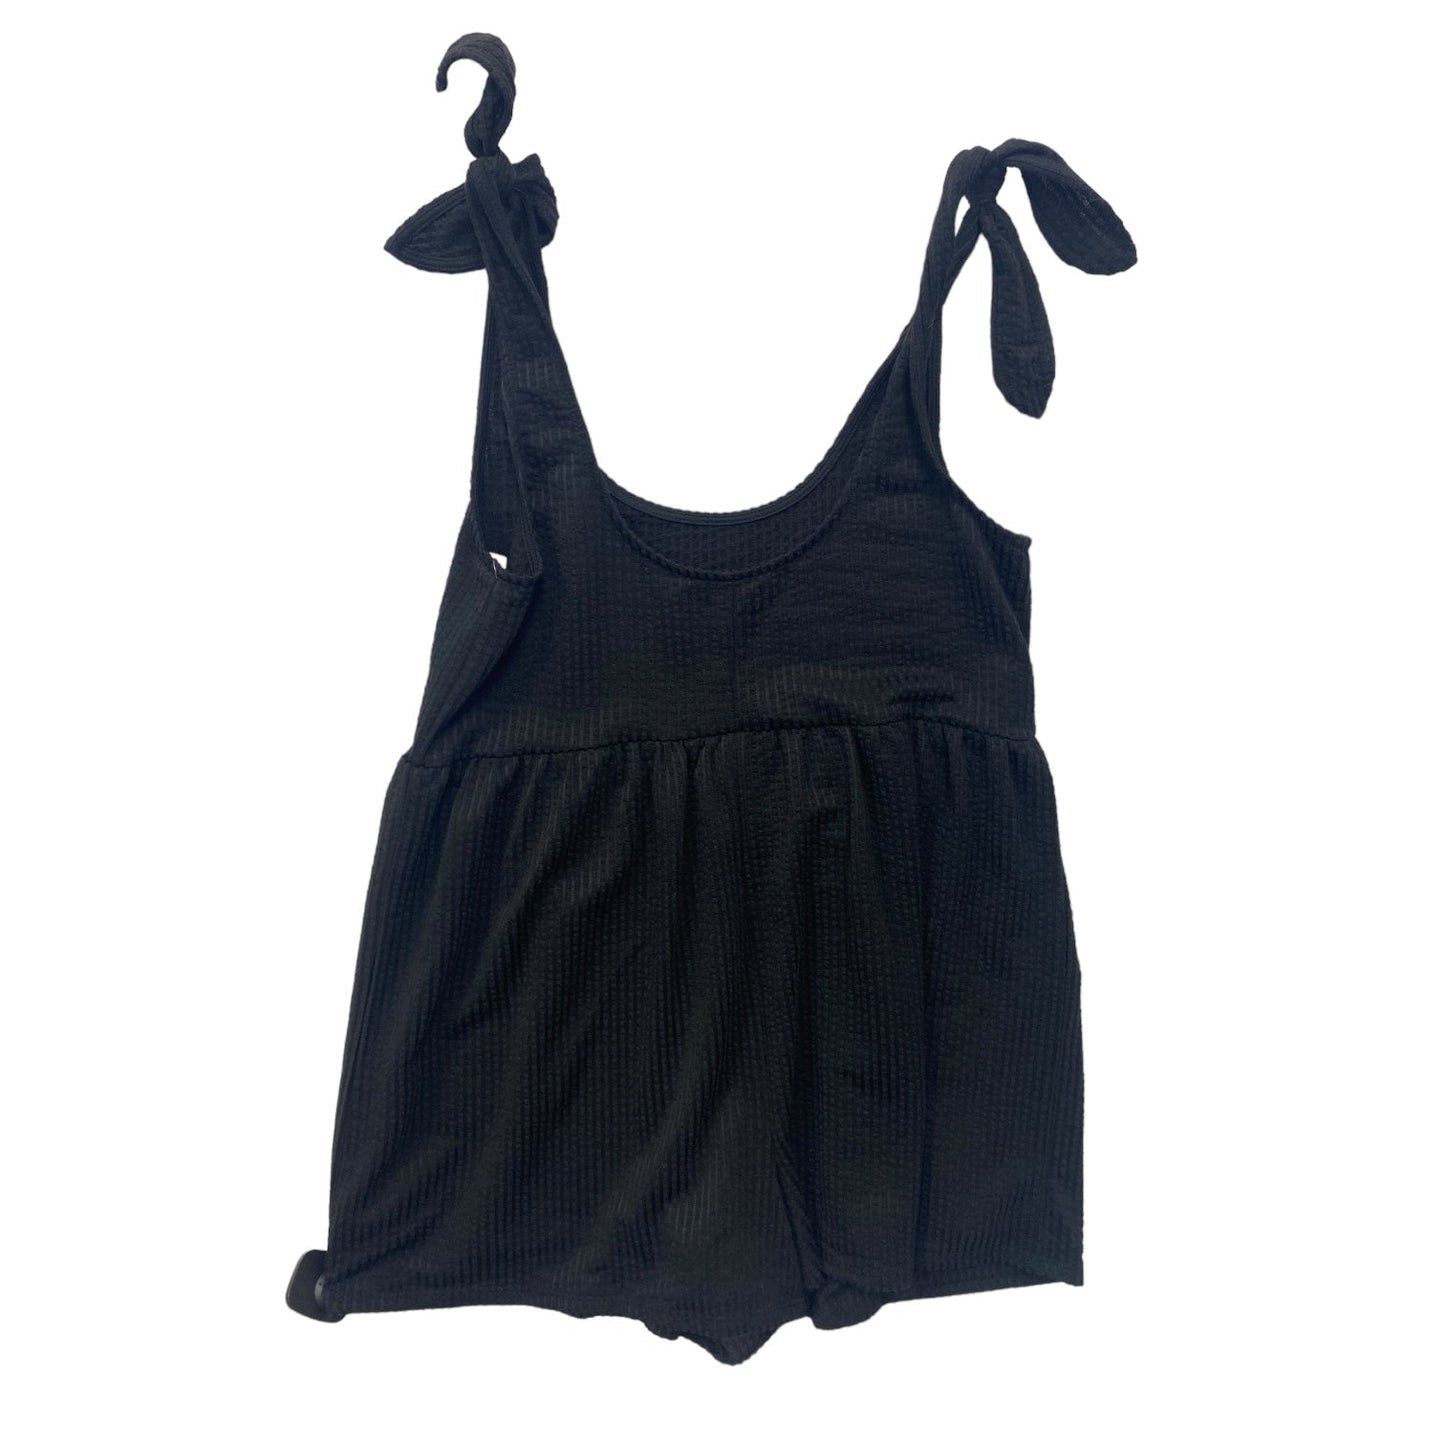 Black Romper Urban Outfitters, Size S